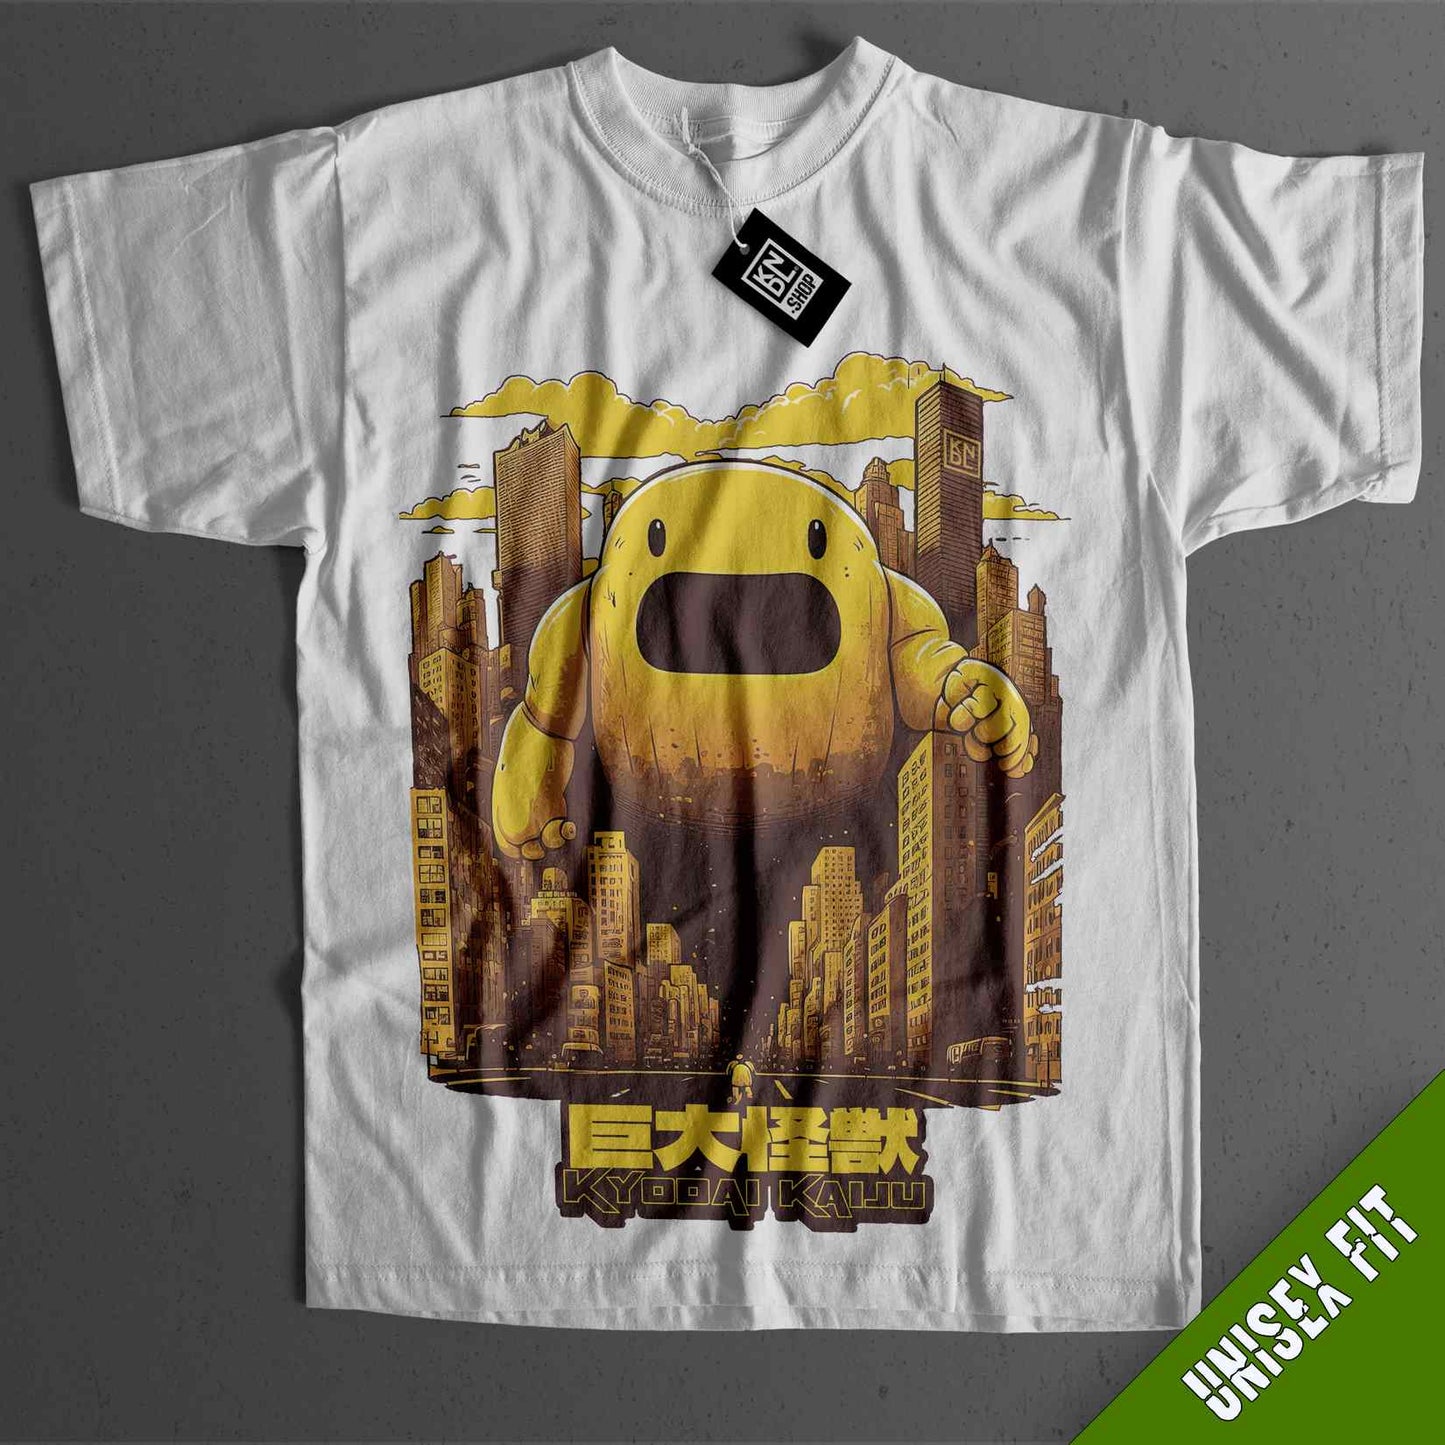 a t - shirt with a picture of a yellow monster on it